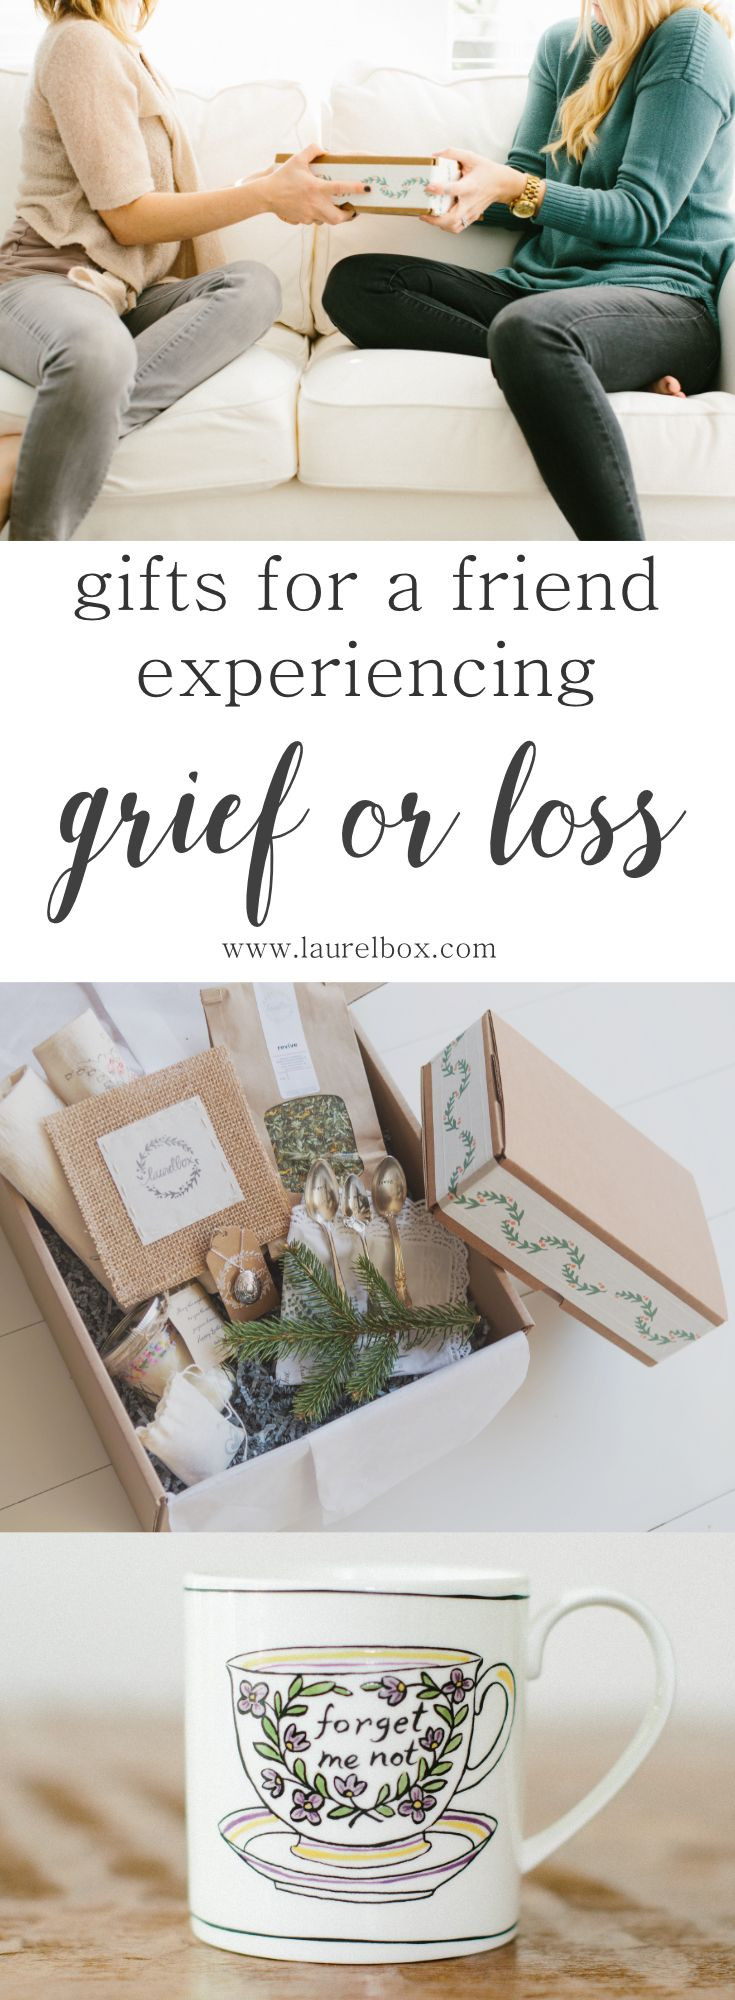 Gift Basket Ideas For Death In Family
 The 25 best Sympathy ts ideas on Pinterest